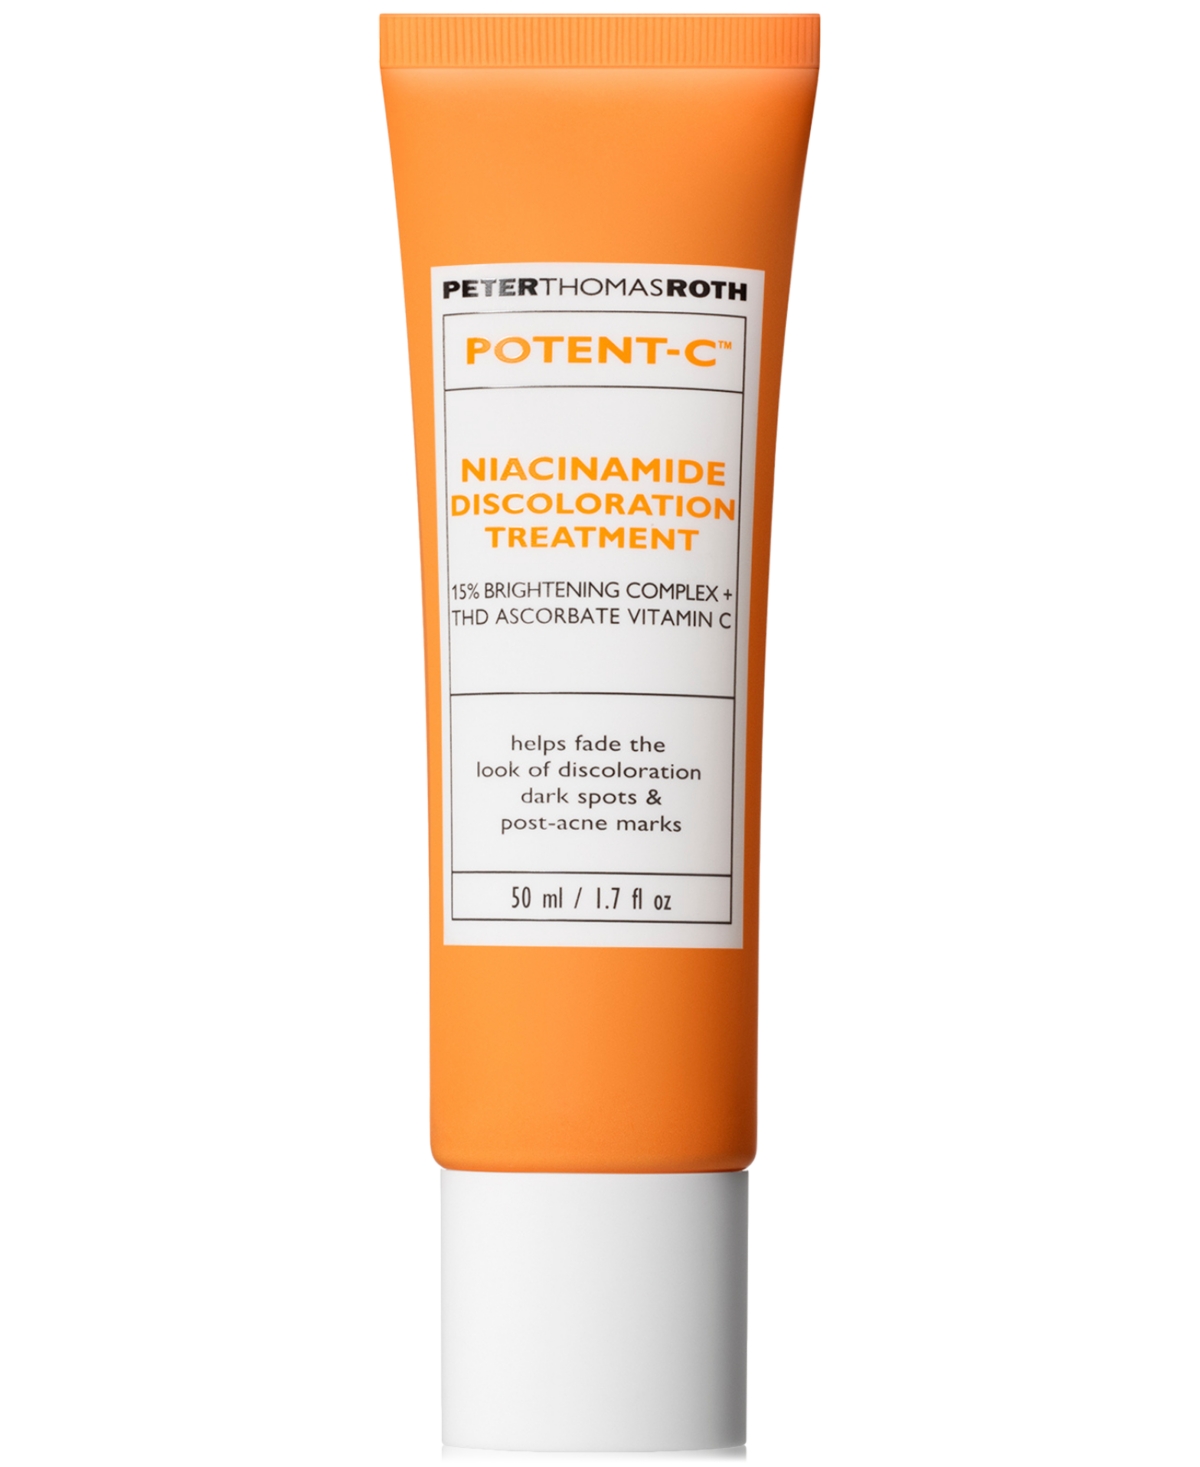 Peter Thomas Roth Potent-c Niacinamide Discoloration Treatment, 1.7 Oz. In White